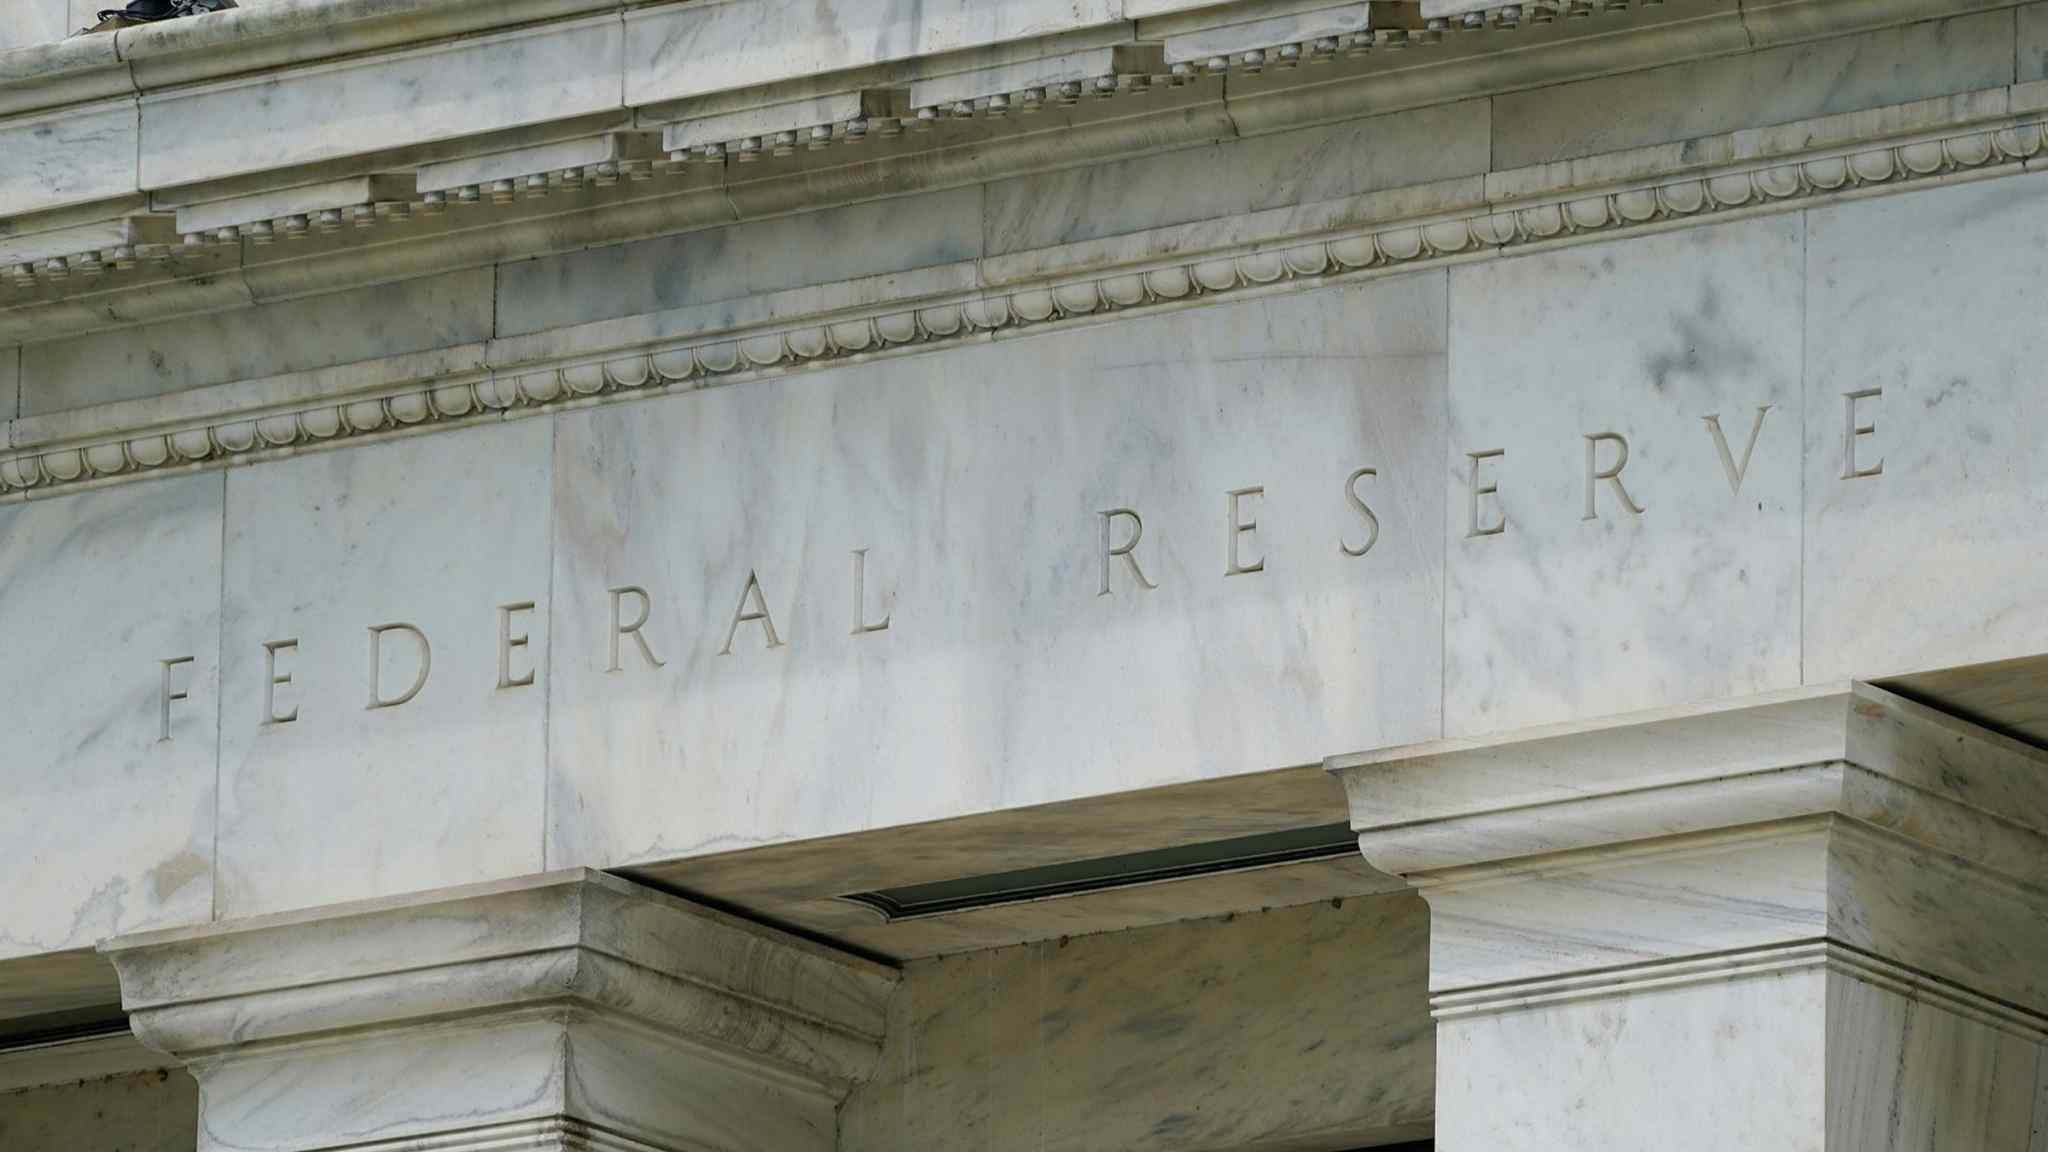 US Treasuries sell off as traders look ahead to rate rises